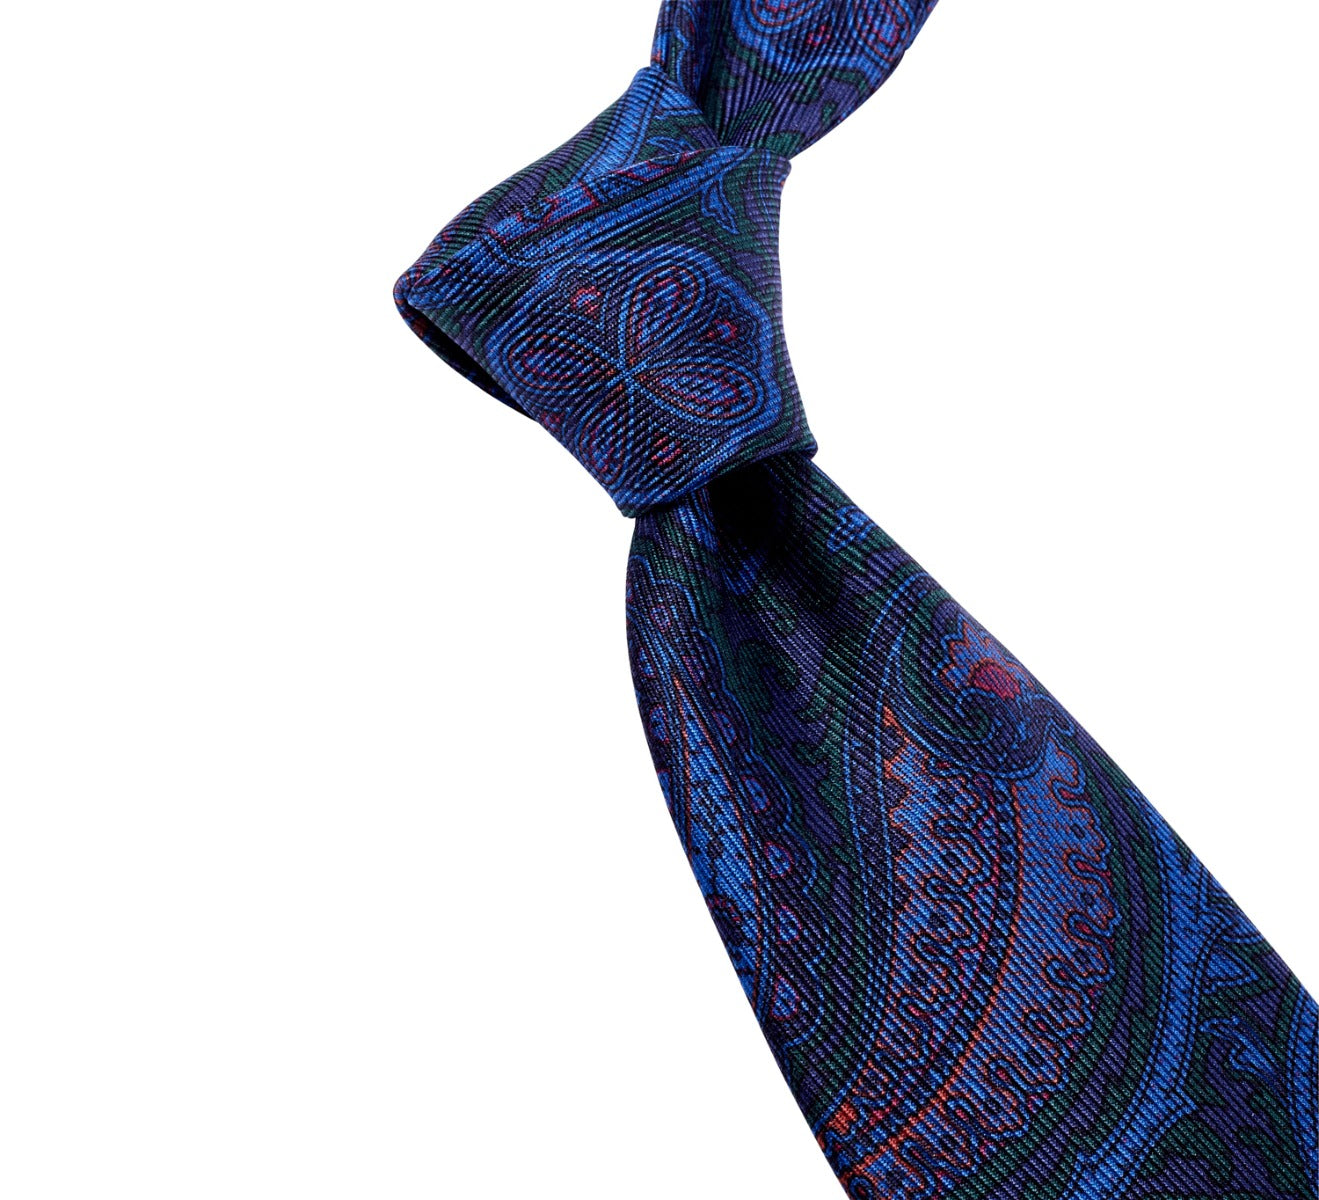 A Sovereign Grade Navy and Forest Paisley Ancient Madder Silk Tie on a white background from KirbyAllison.com.